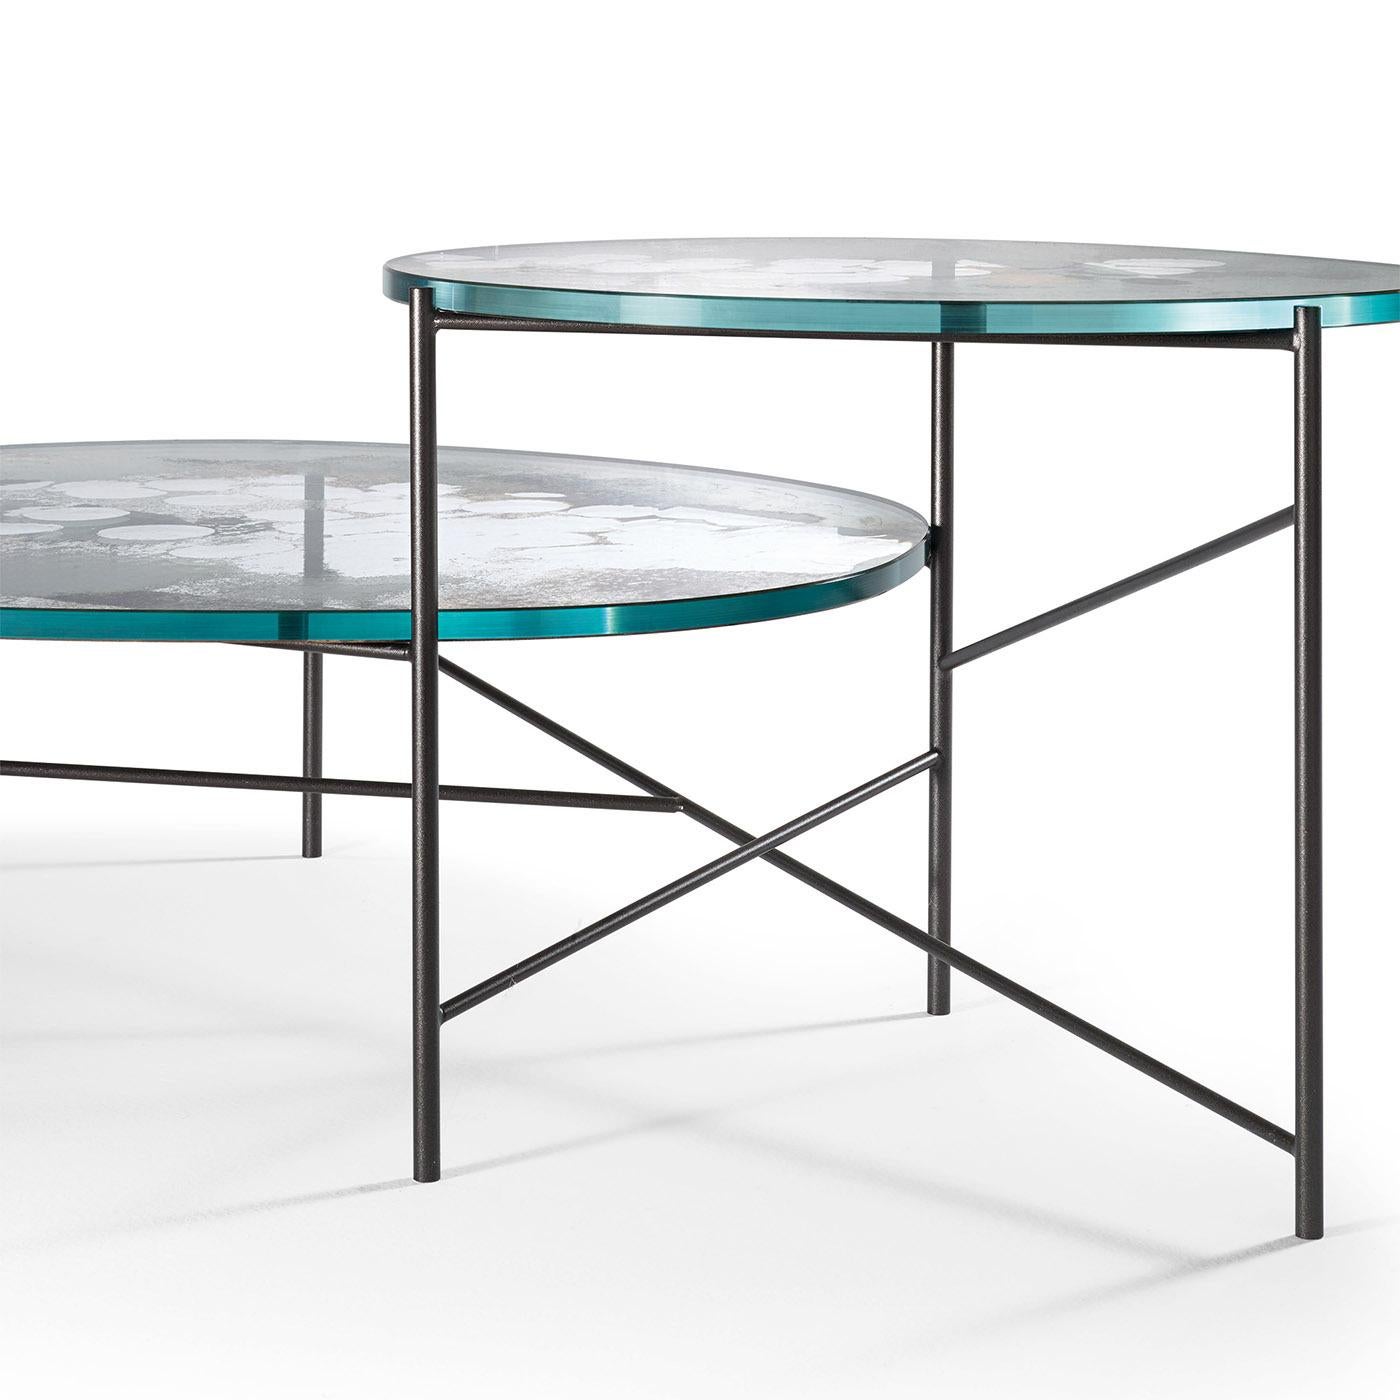 This contemporary coffee table is part of the innovative K Collection designed by Giovanni Luca Ferreri that showcases decorative mirrored surfaces in a sleek and essential frame. These structures define clear and three-dimensional geometries, in